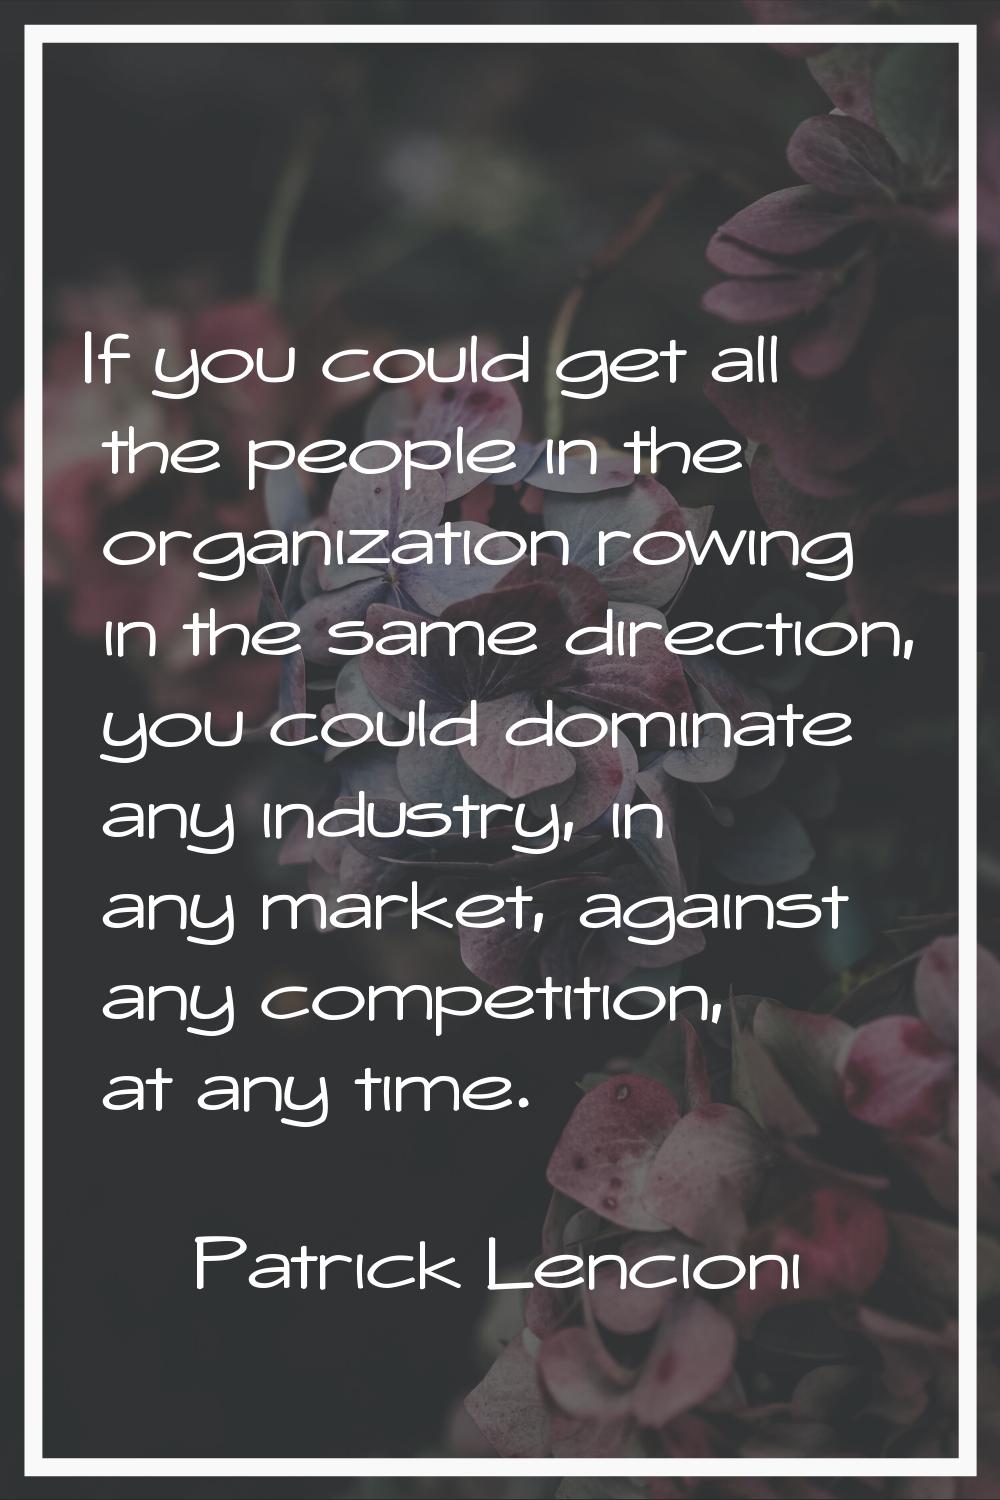 If you could get all the people in the organization rowing in the same direction, you could dominat